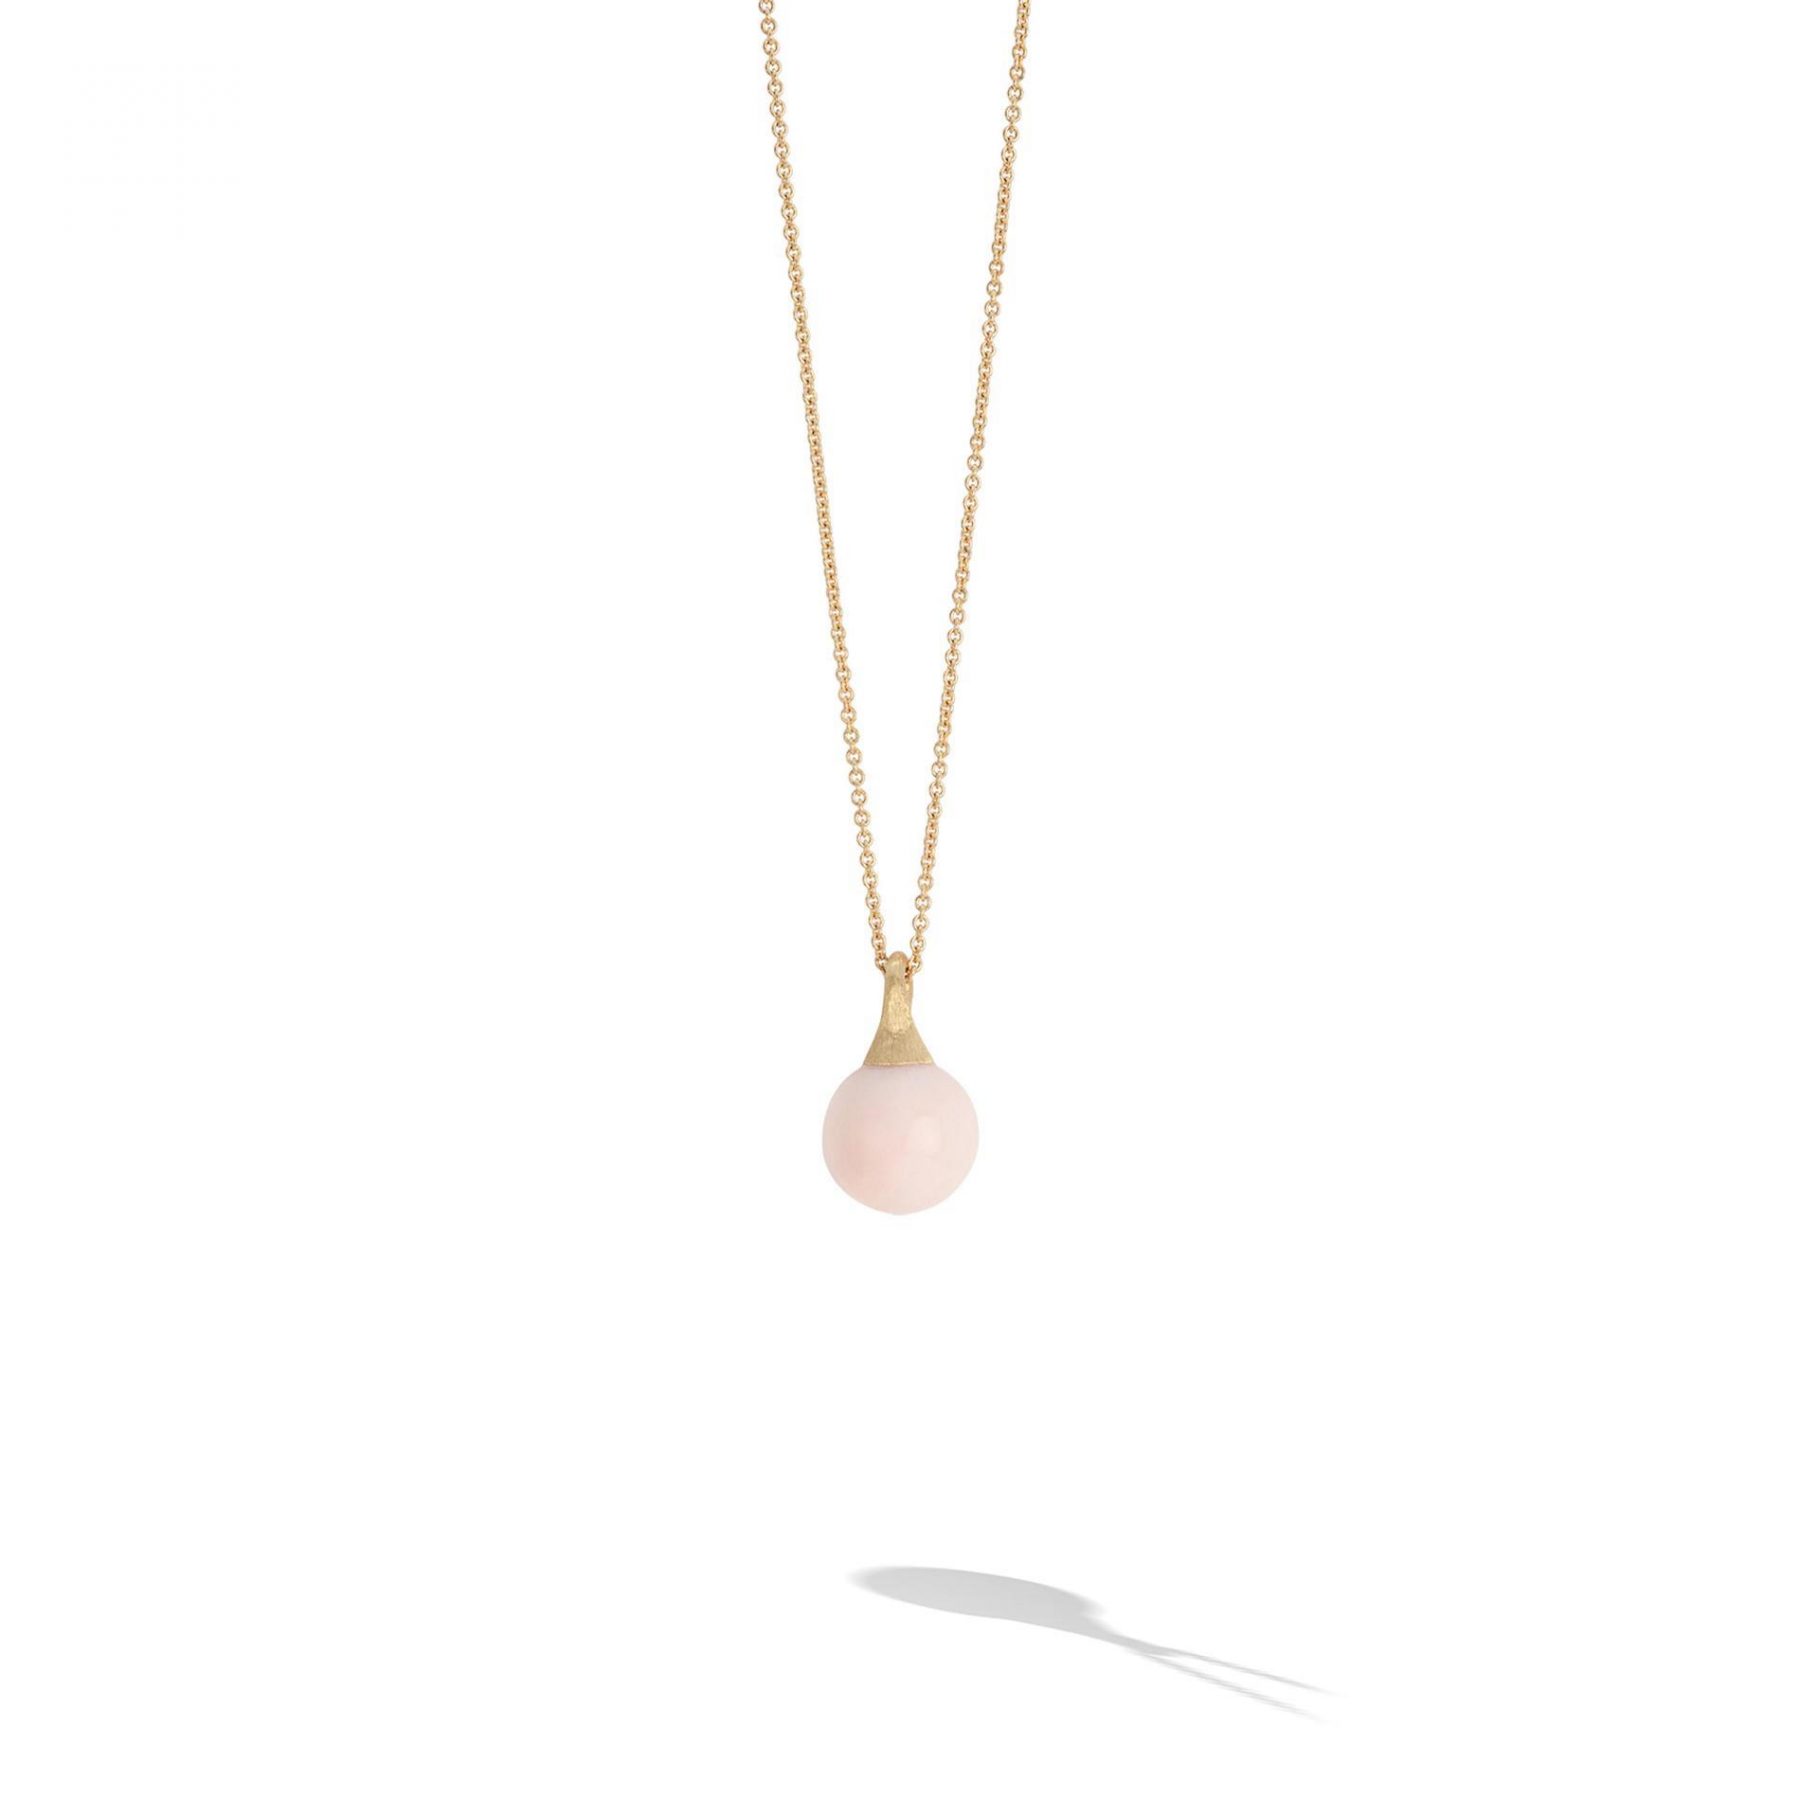 Kette Africa pink Opal 18ct Go - Marco Bicego - CB2493OP01